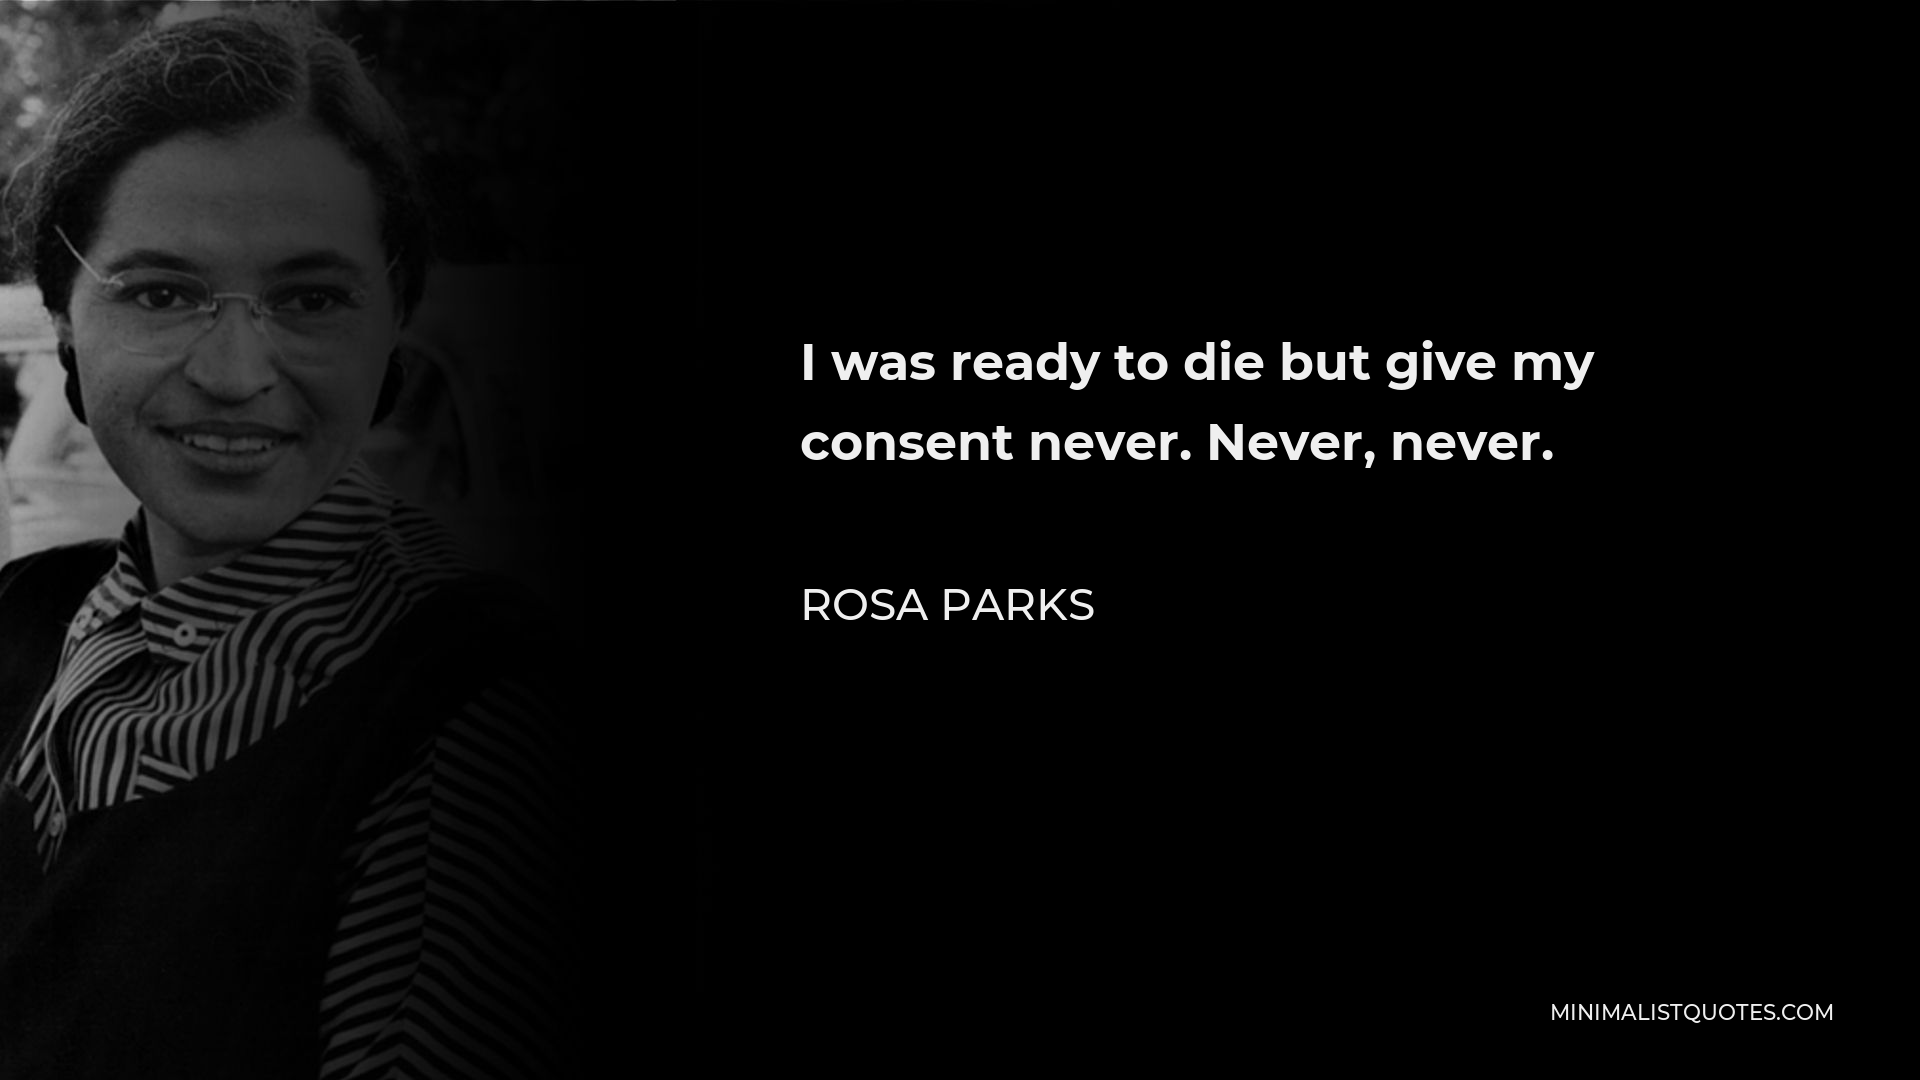 Rosa Parks Quote - I was ready to die but give my consent never. Never, never.